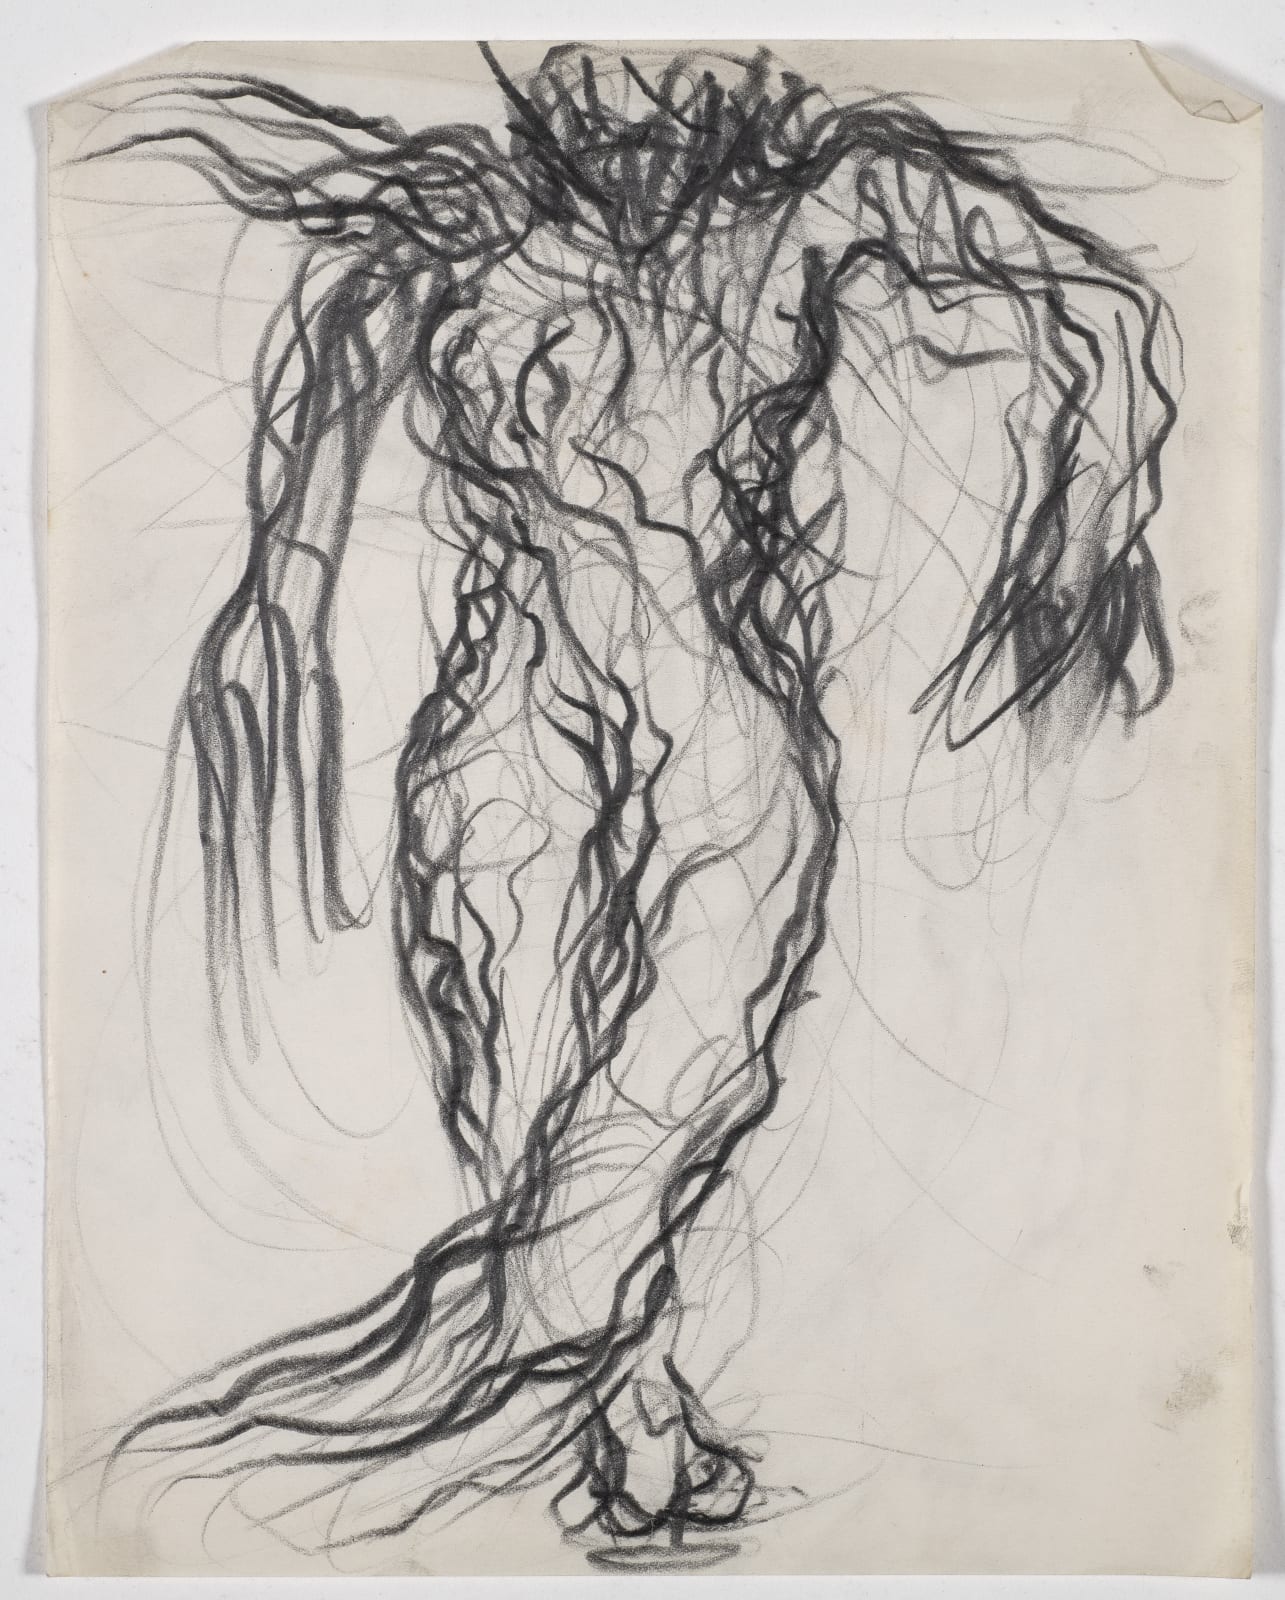 Standing Figure, c. 1948-49 Pencil on paper 17.2 x 21.3cm The Gustav Metzger Foundation